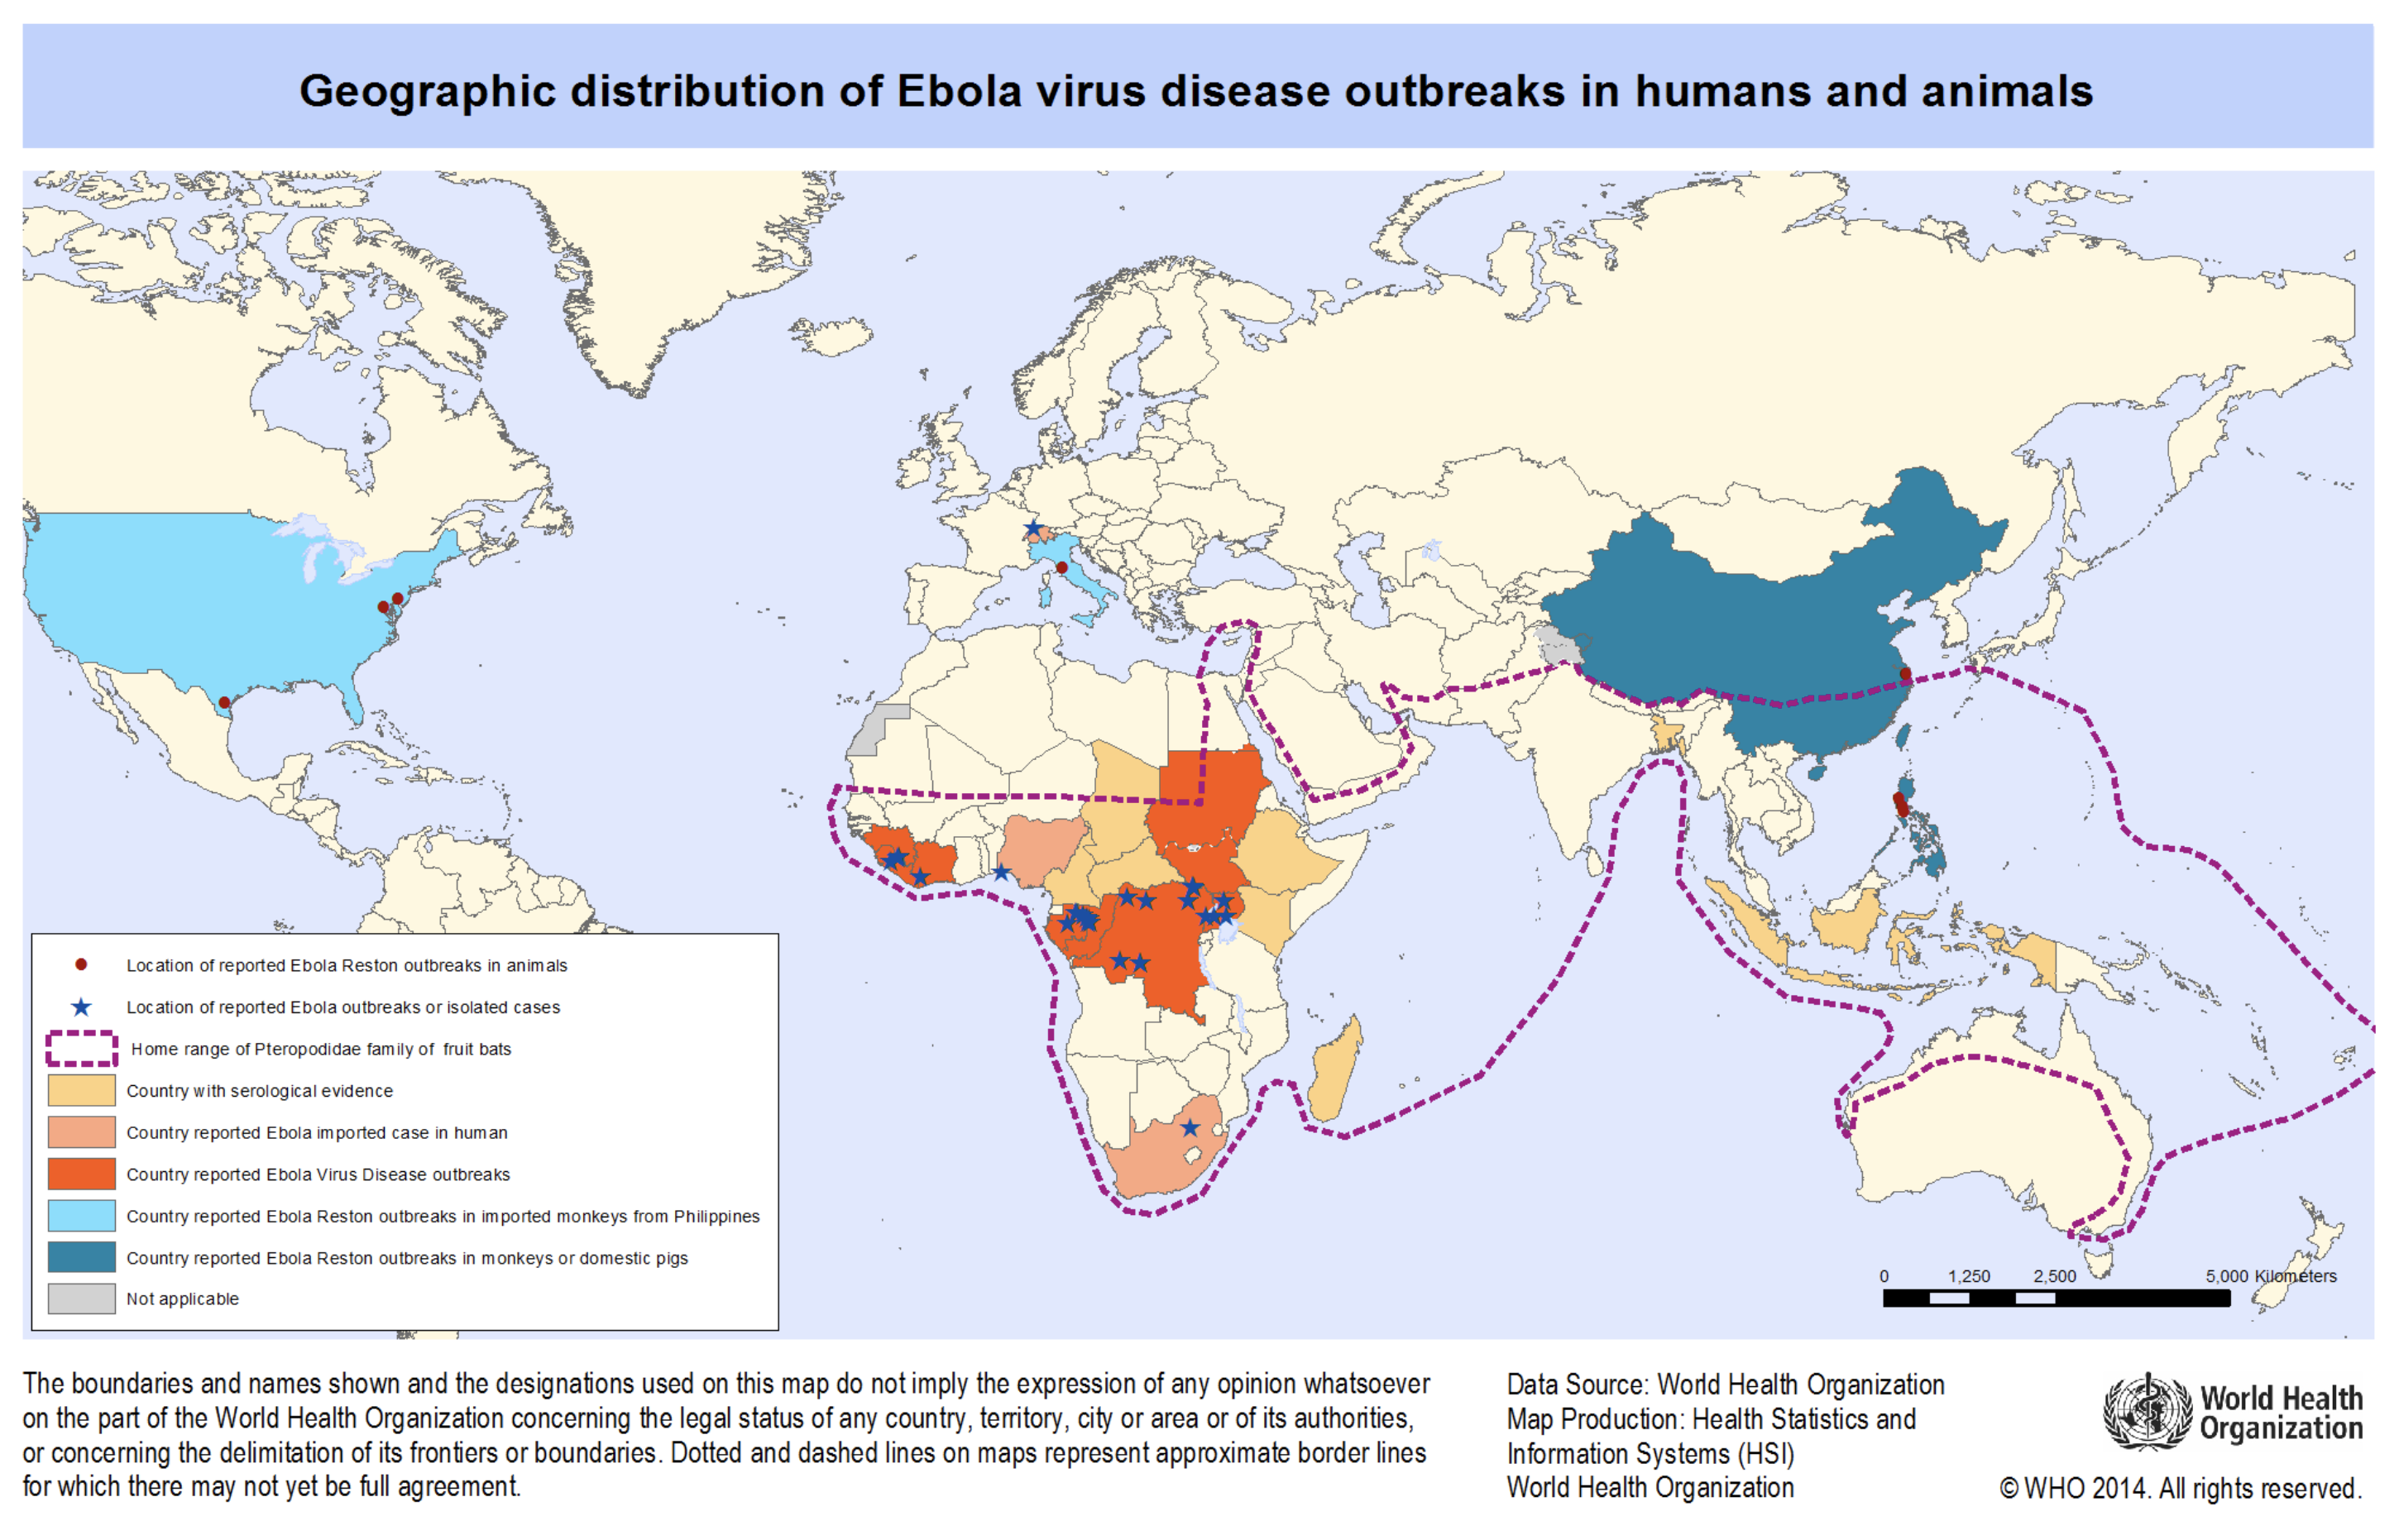 Geographic distribution of Ebola virus disease outbreaks in humans and animals